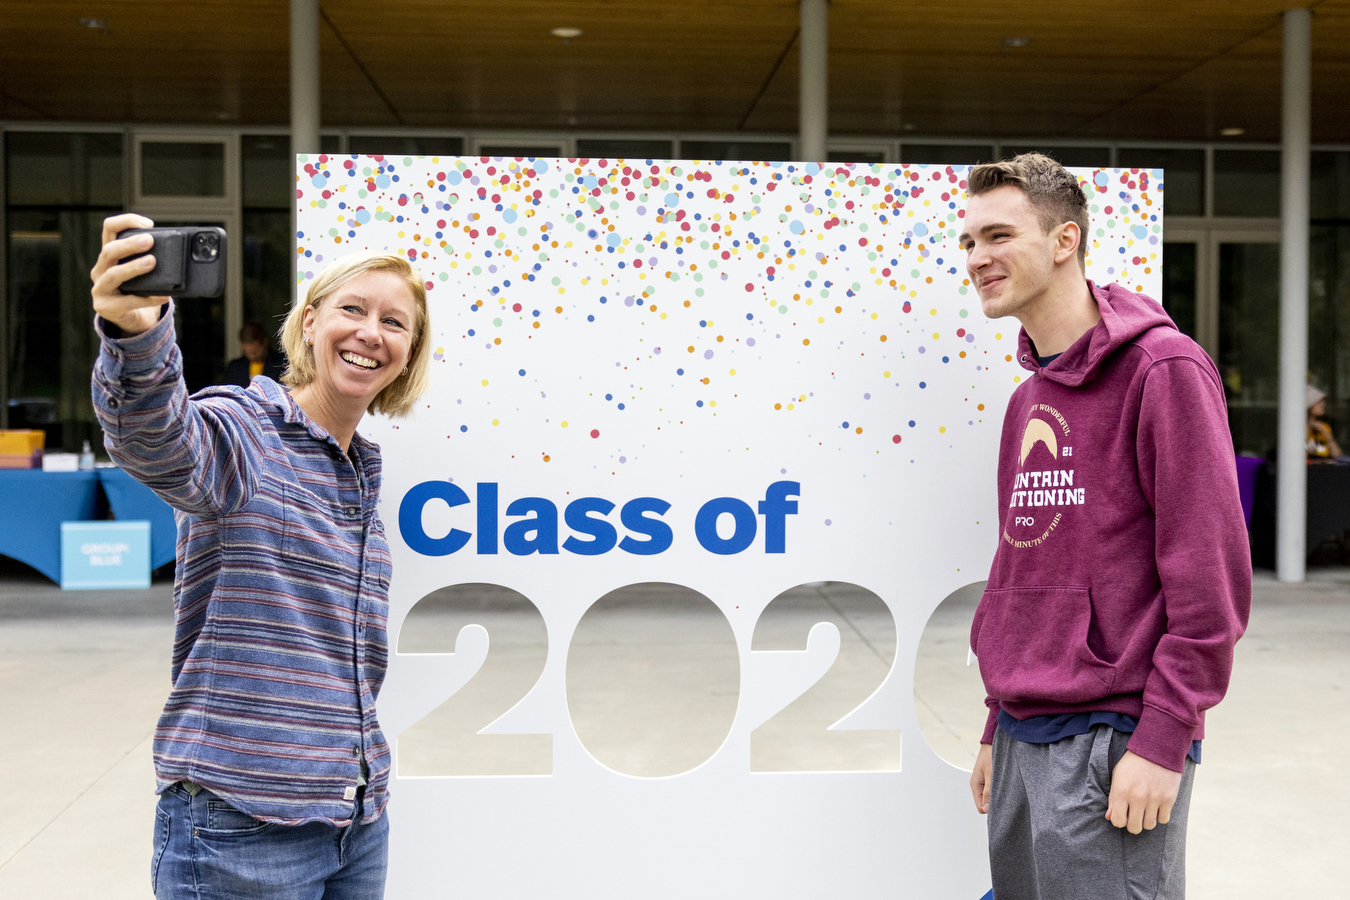 A mother (left) and her son(right) pose for a selfie in front of a white sign with multi-colored confetti with the words "Class of" seen